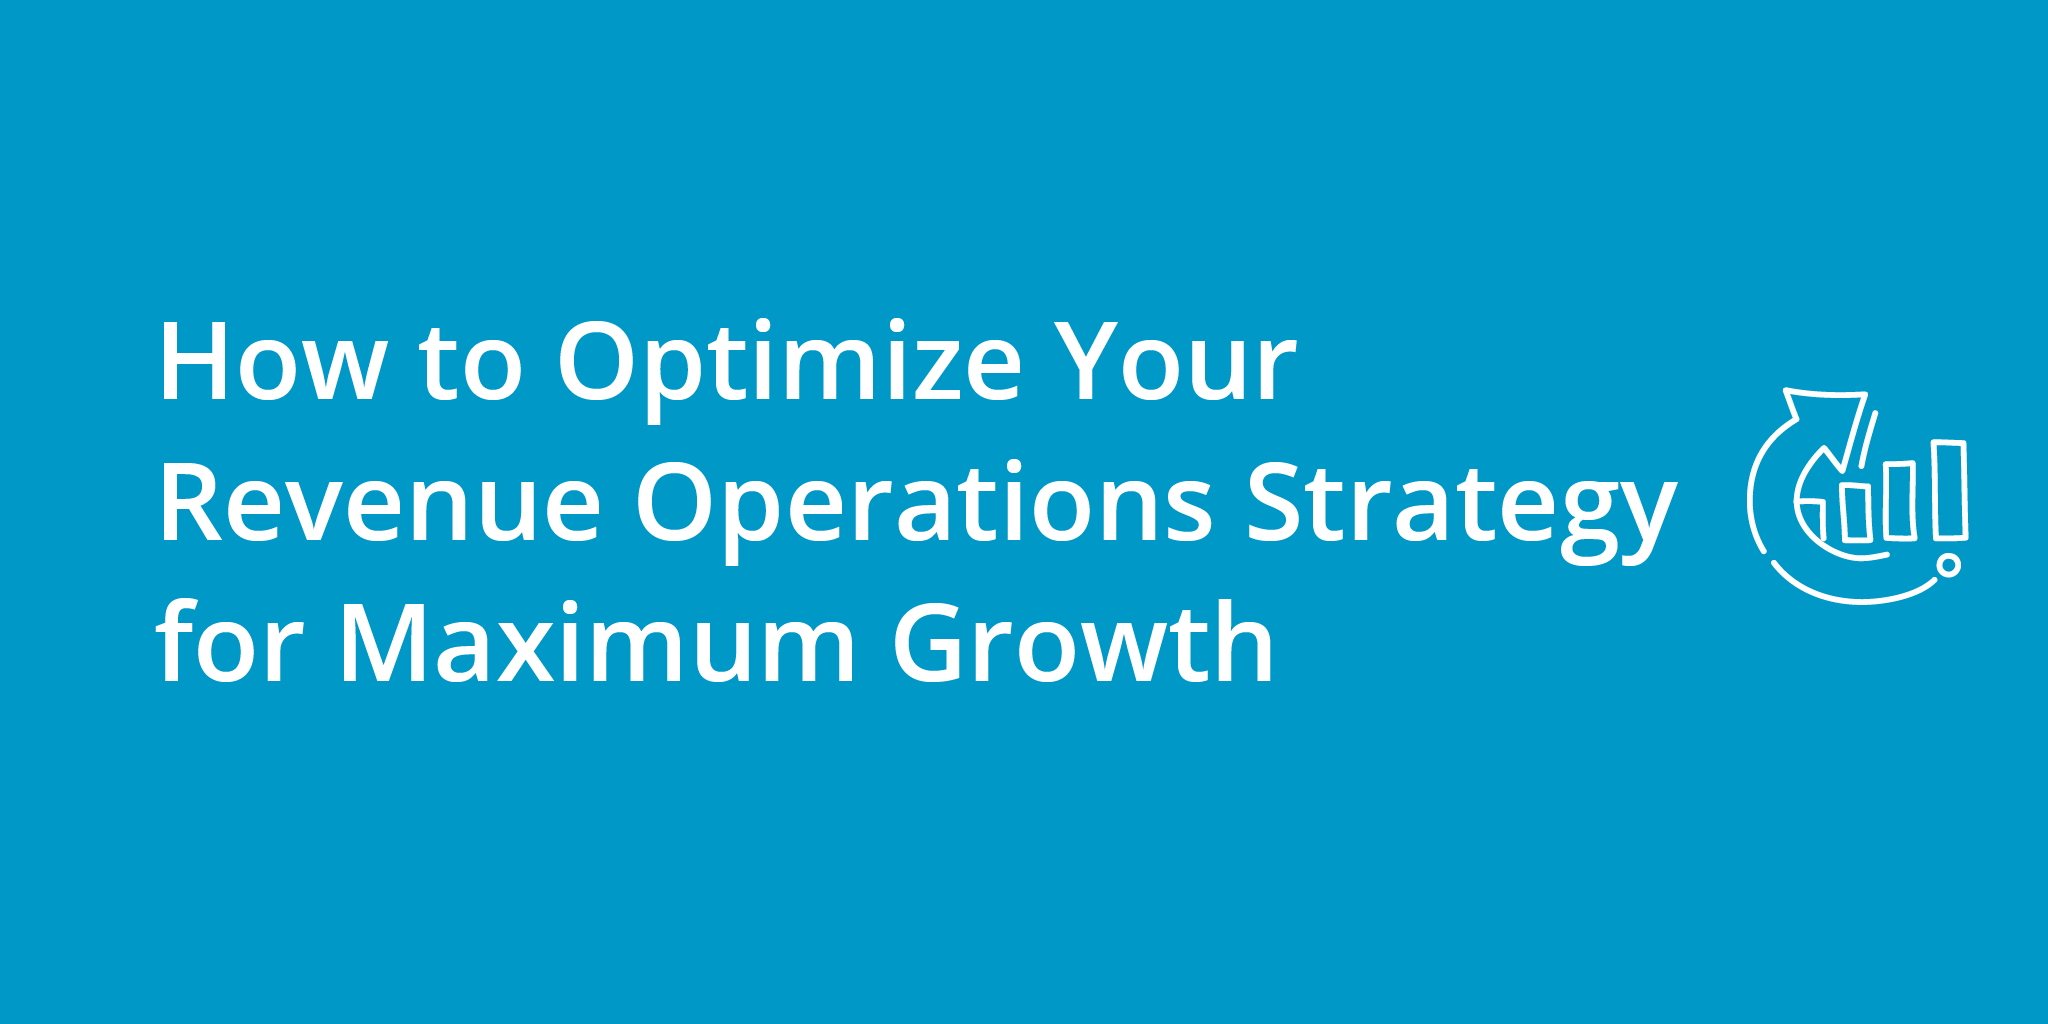 How to Optimize Your Revenue Operations Strategy for Maximum Growth | Telephones for business